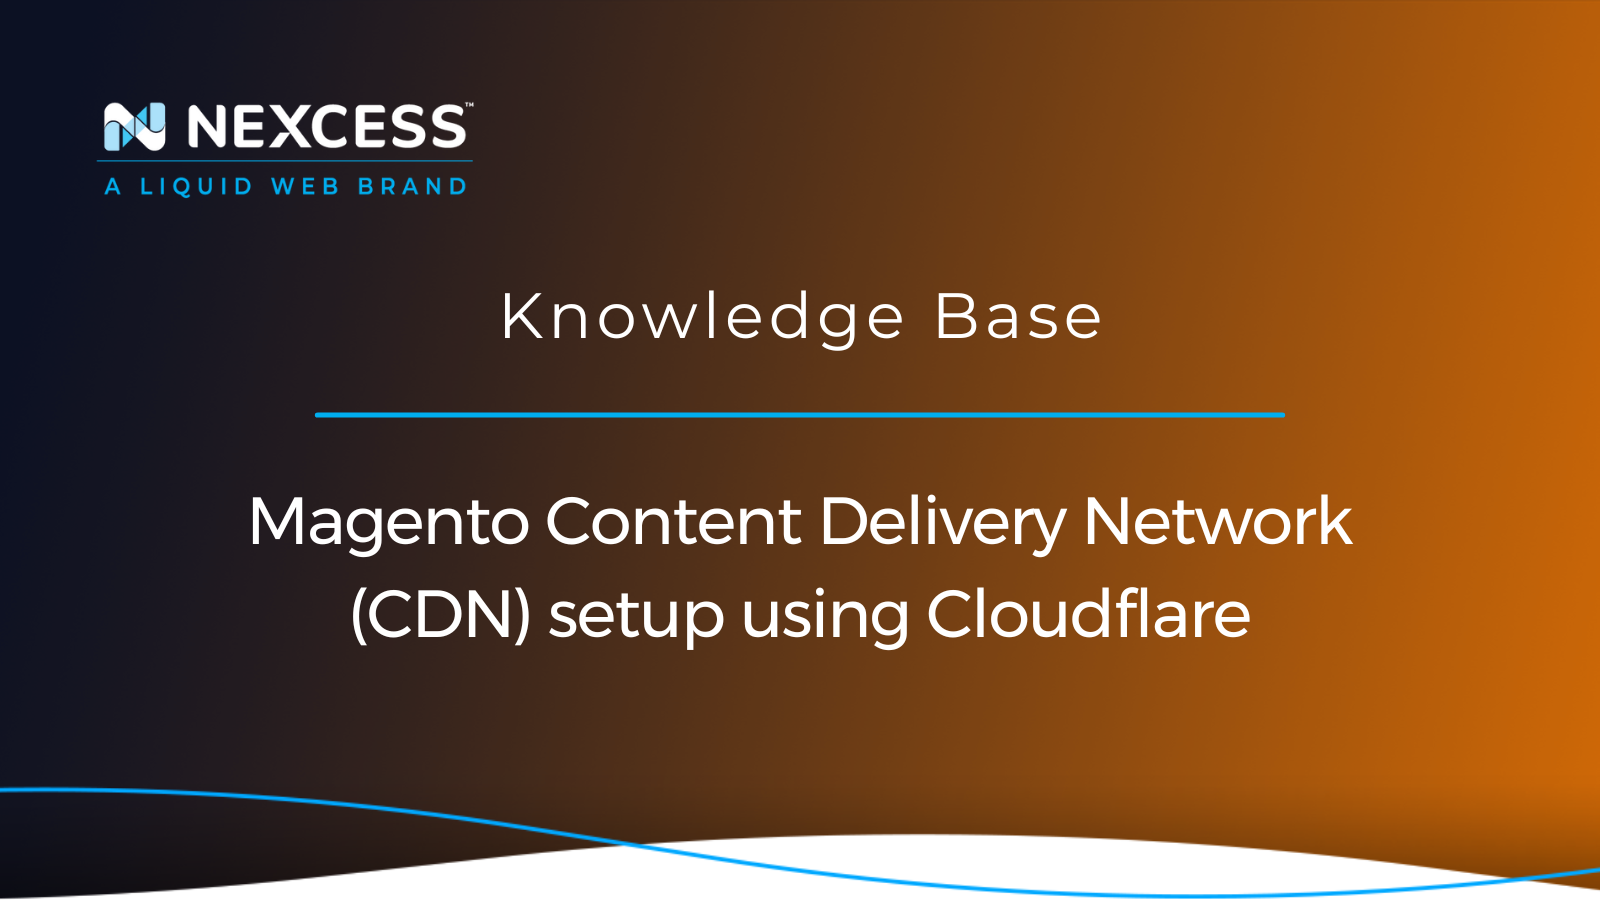 Magento Content Delivery Network (CDN) setup using Cloudflare